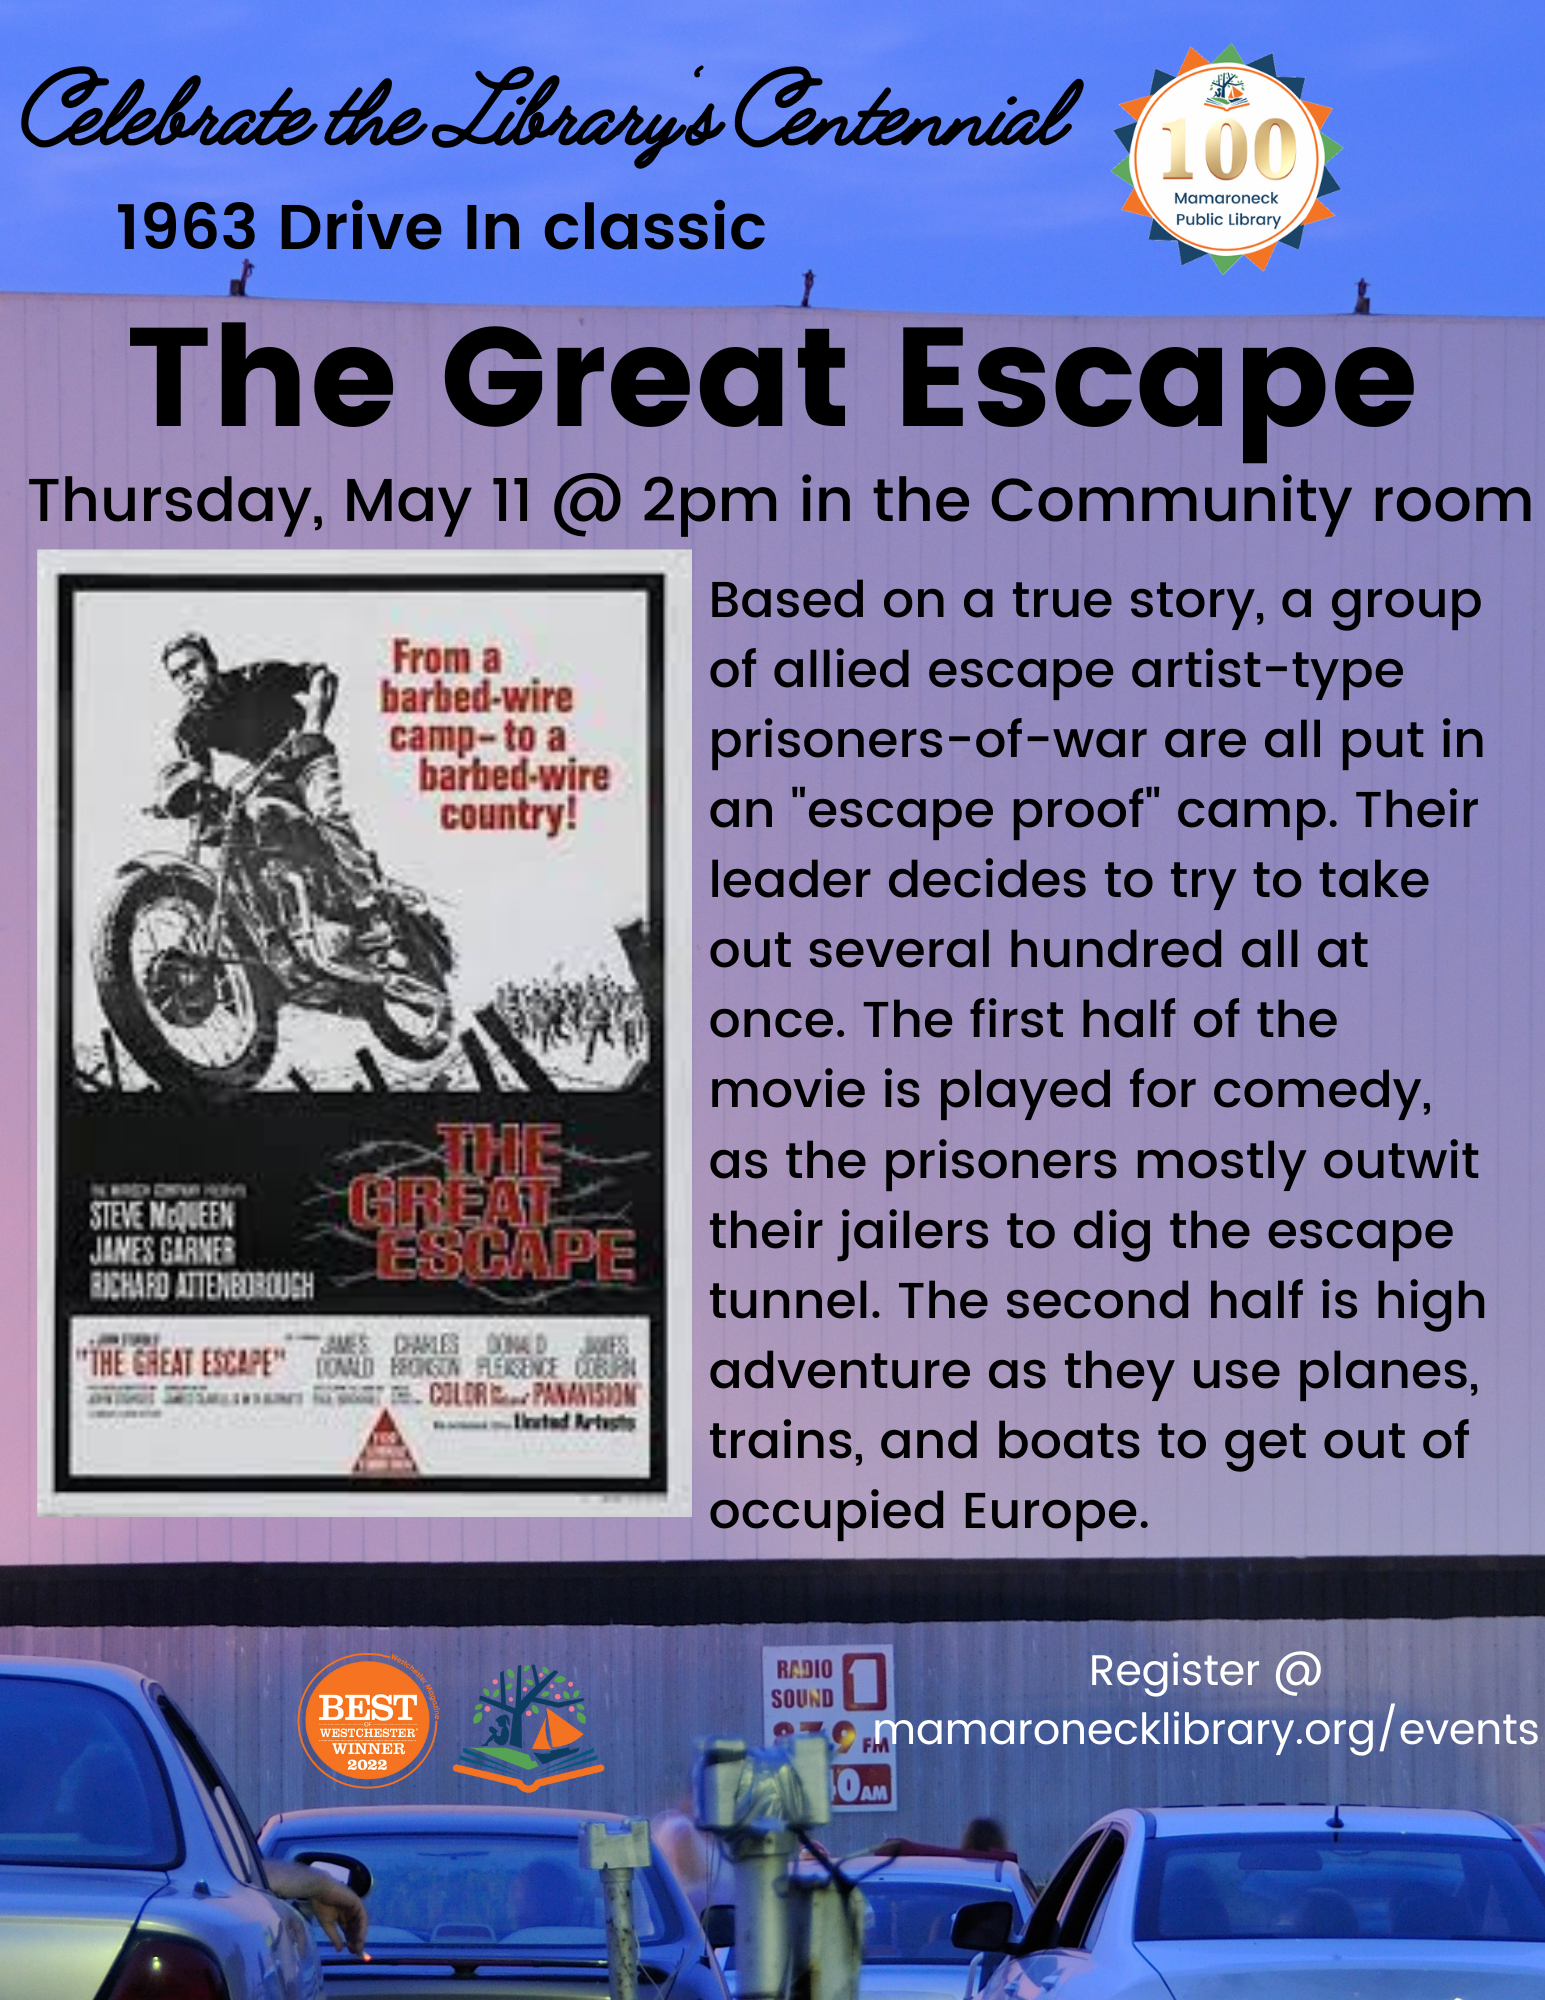 5/11 Centennial film series: The Great Escape @ 2pm in the Community Room